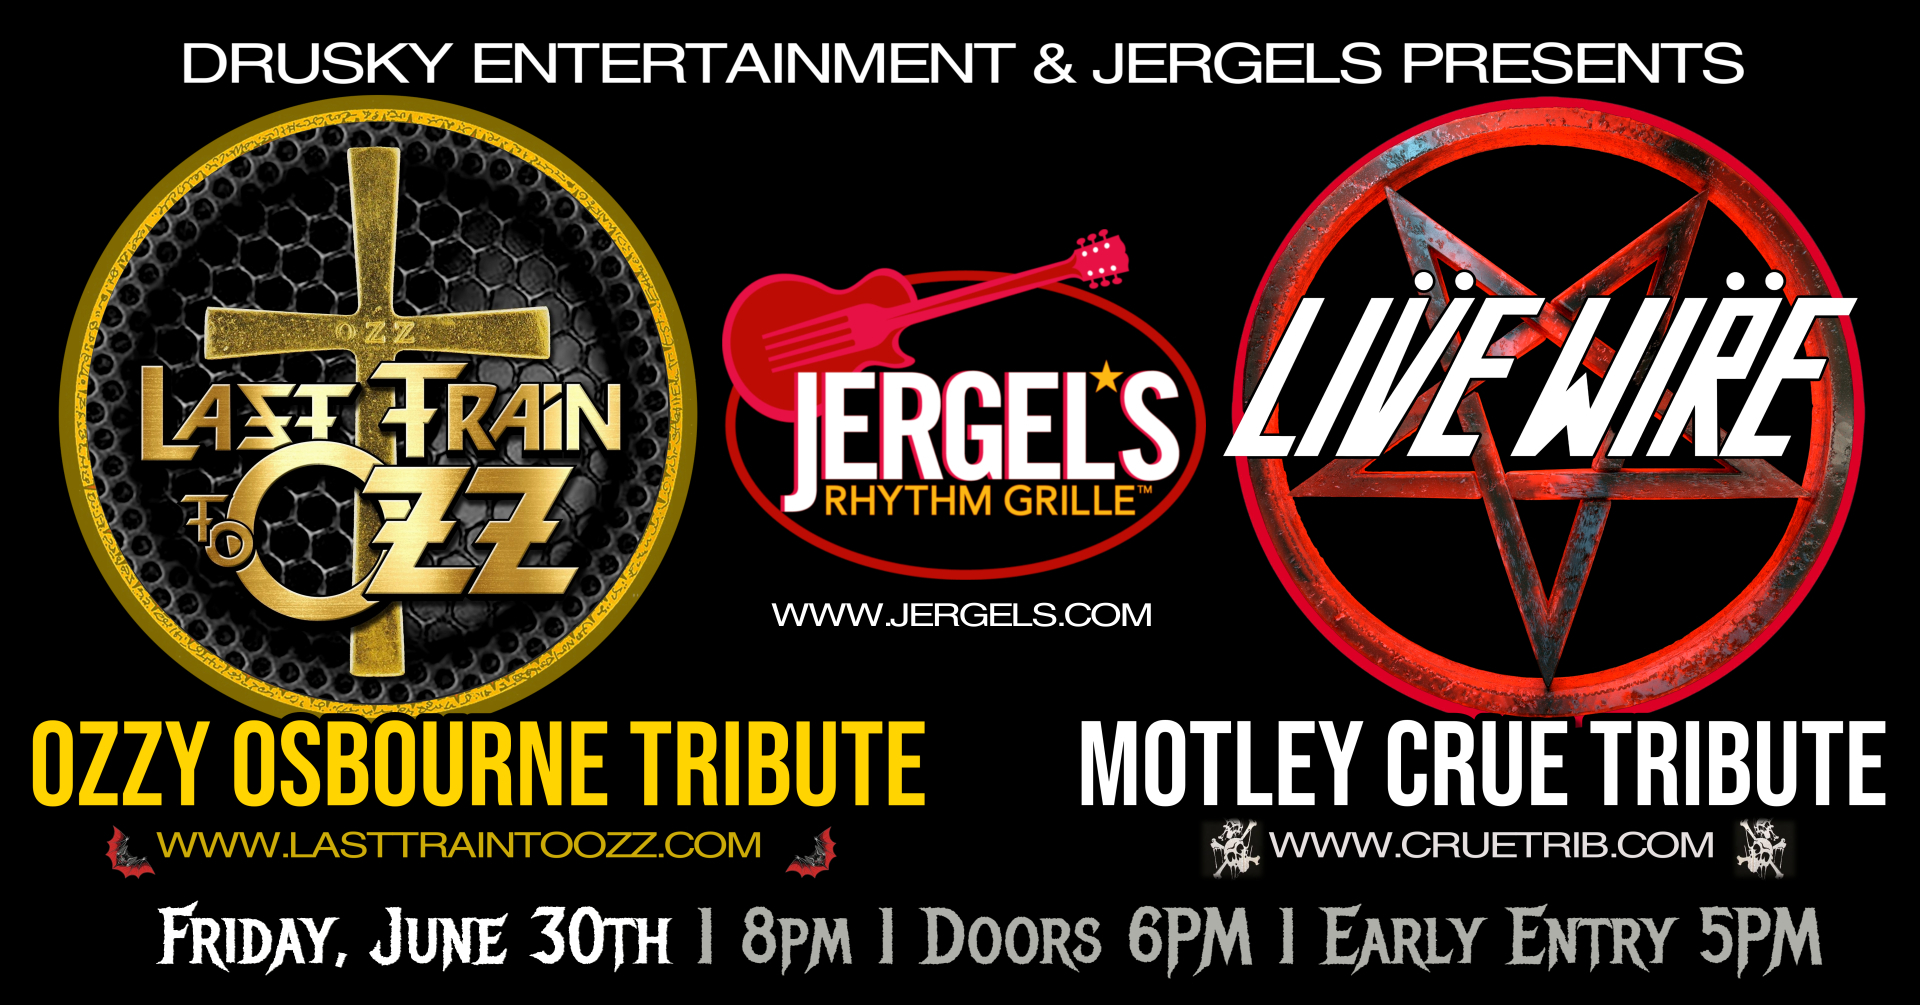 Live Wire - The Premier Motley Crue Tribute Band - Get your tickets now for  our upcoming JERGELS show with Ozzy Tribute- Last Train to Ozz before  they're gone!